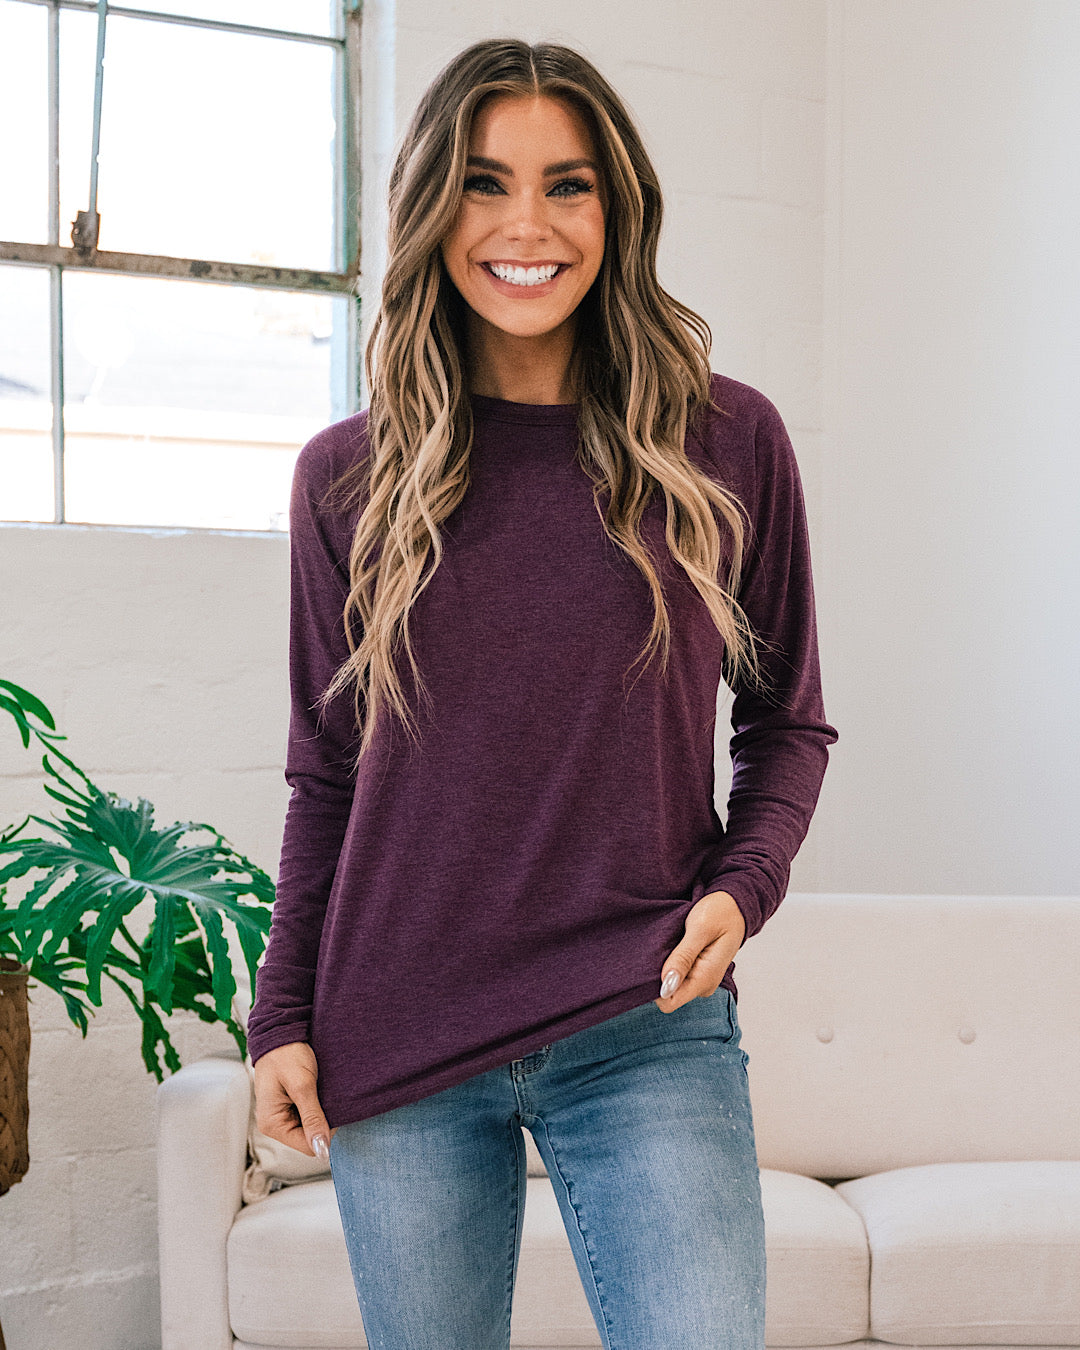 NEW! Little Too Late Long Sleeve Top - Plum  Staccato   